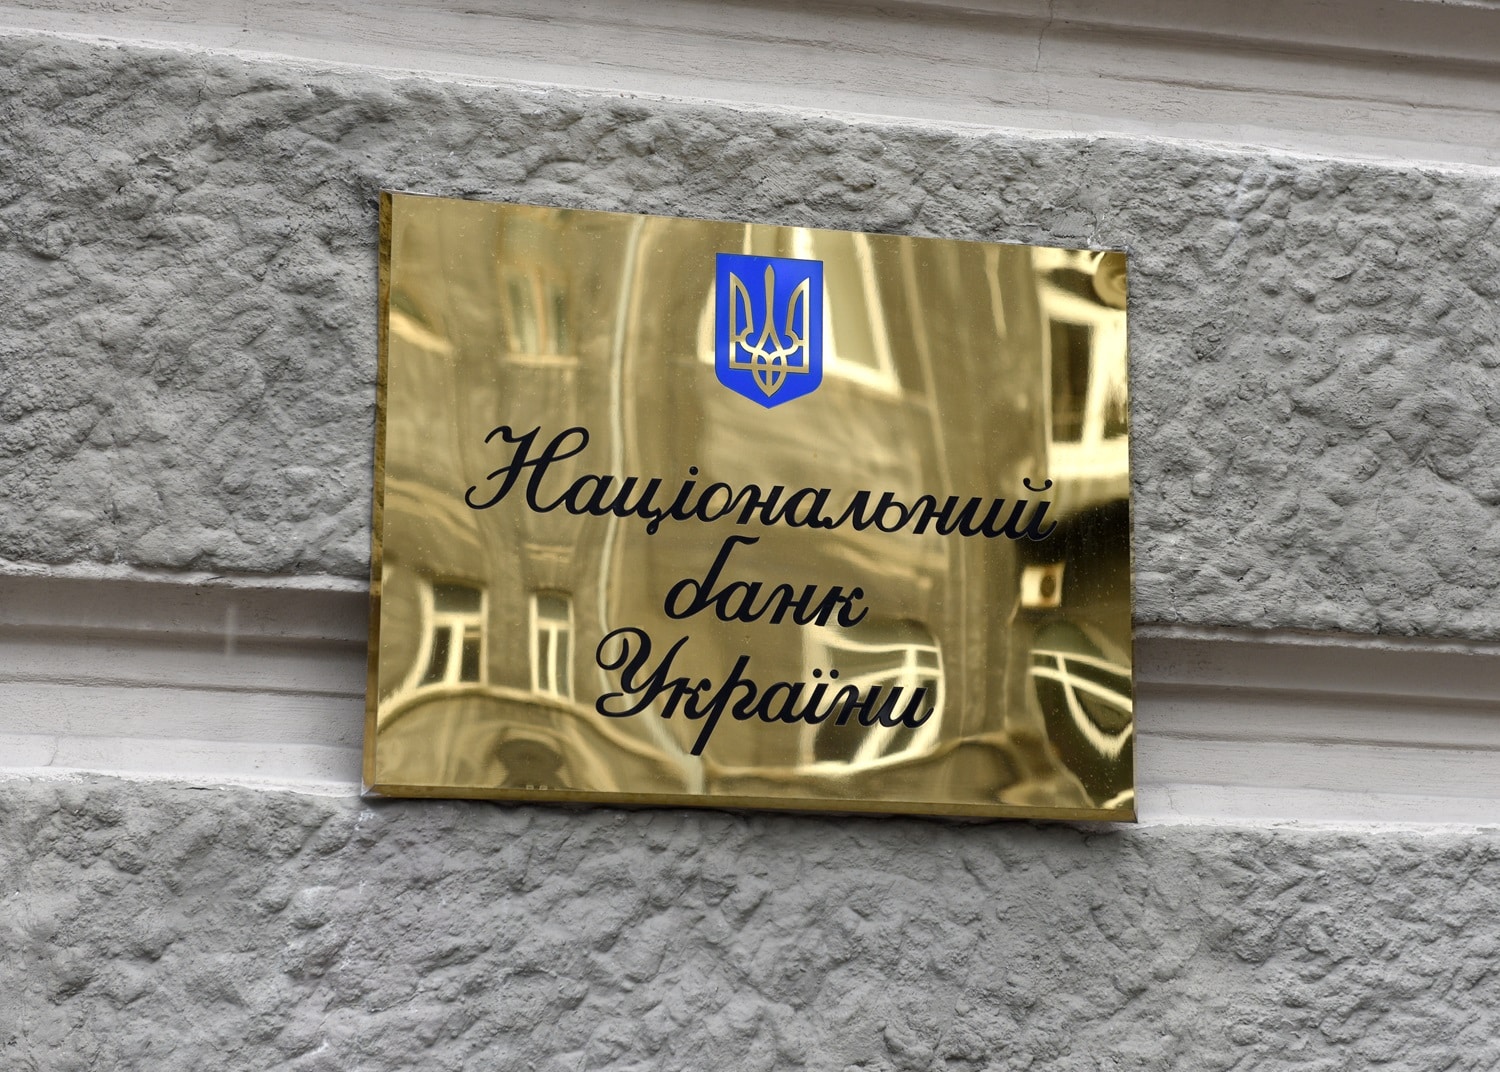 A sign with an inscription that reads “National Bank of Ukraine” in Ukrainian.